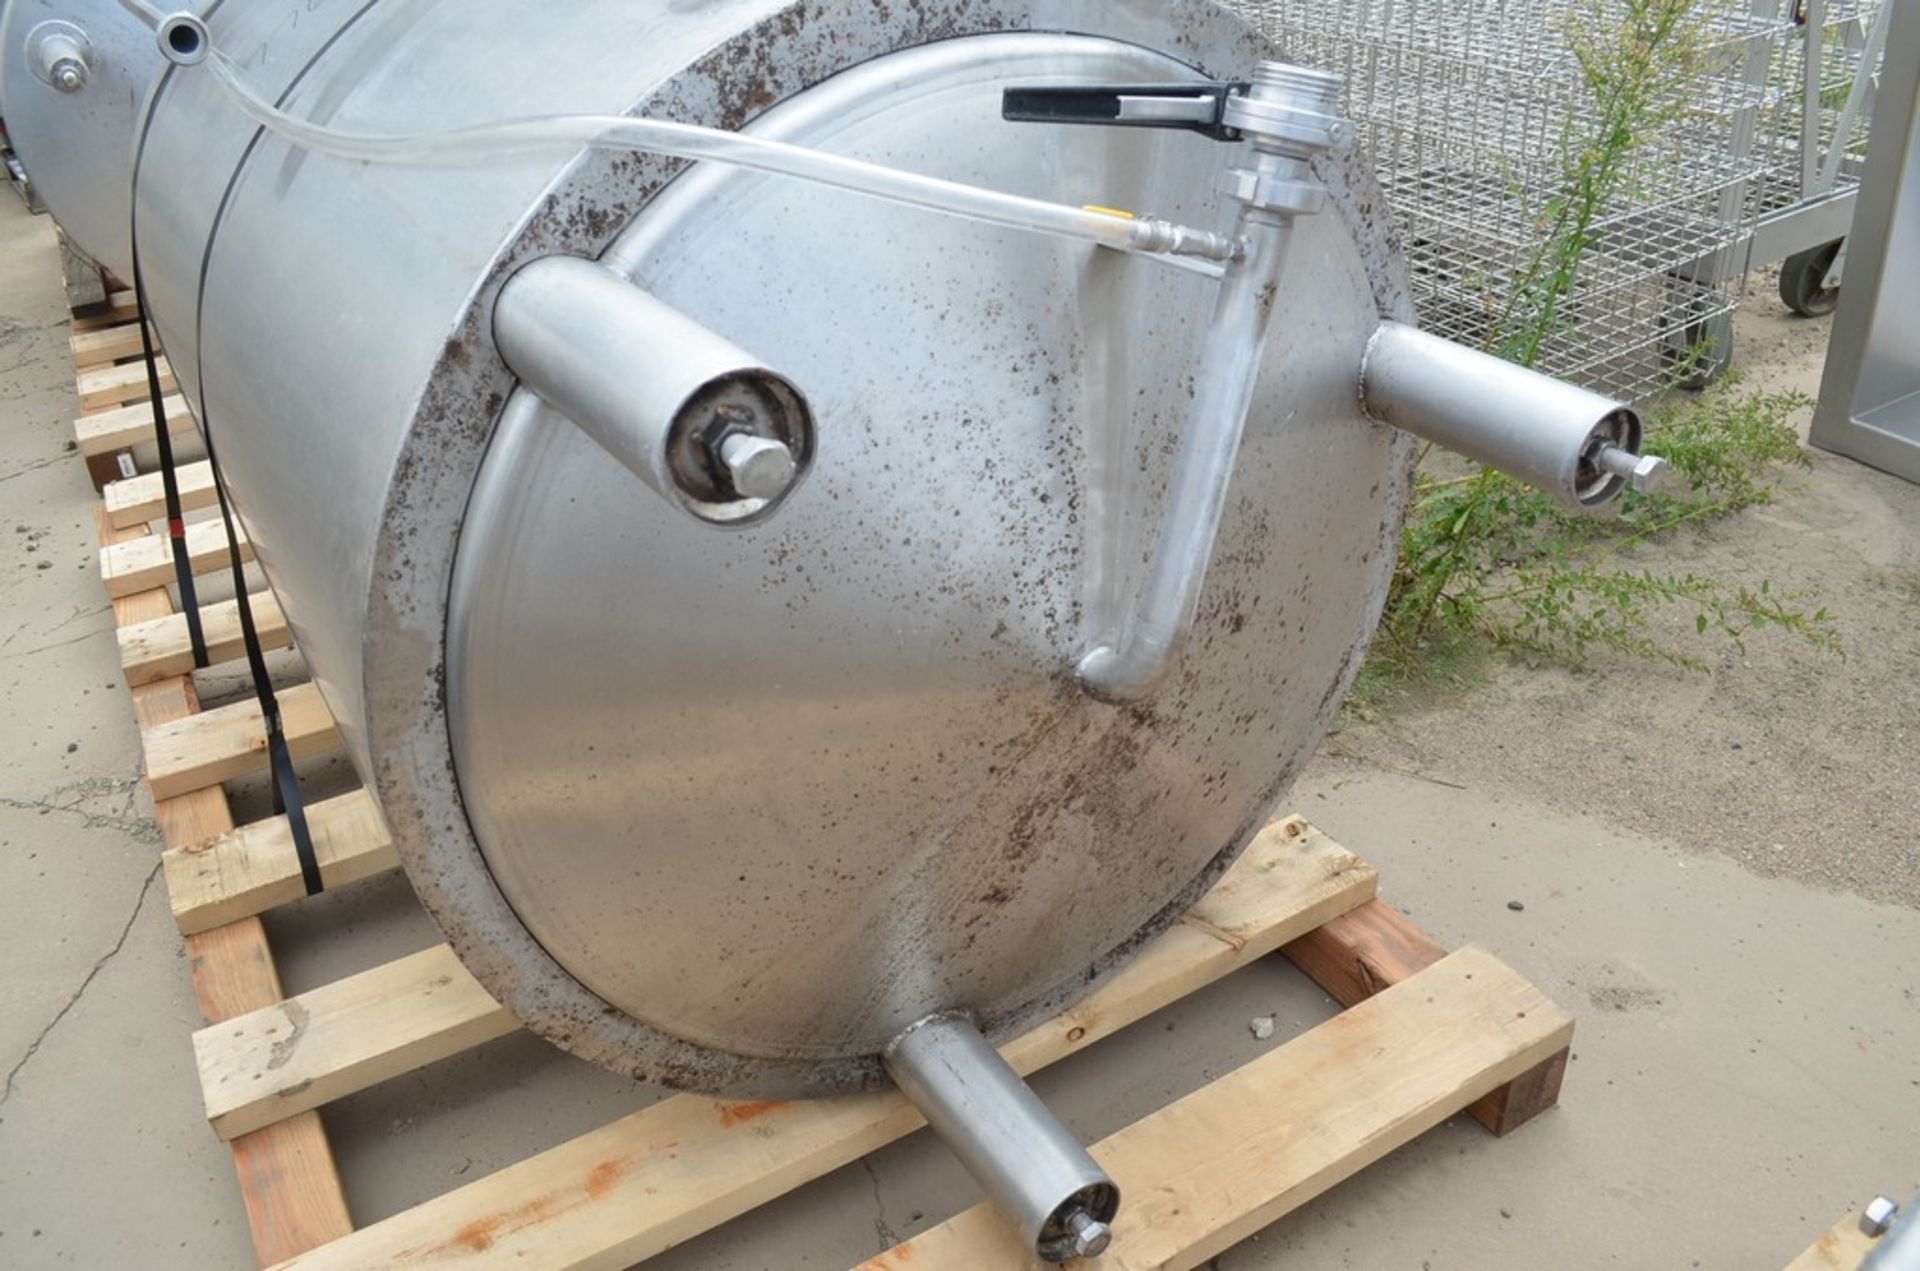 8.5 BBL (1,000 Liter/265 Gallons) Cote Manufacturing Vertical S/S Jacketed Brite Tank. Dome Top, - Image 9 of 11